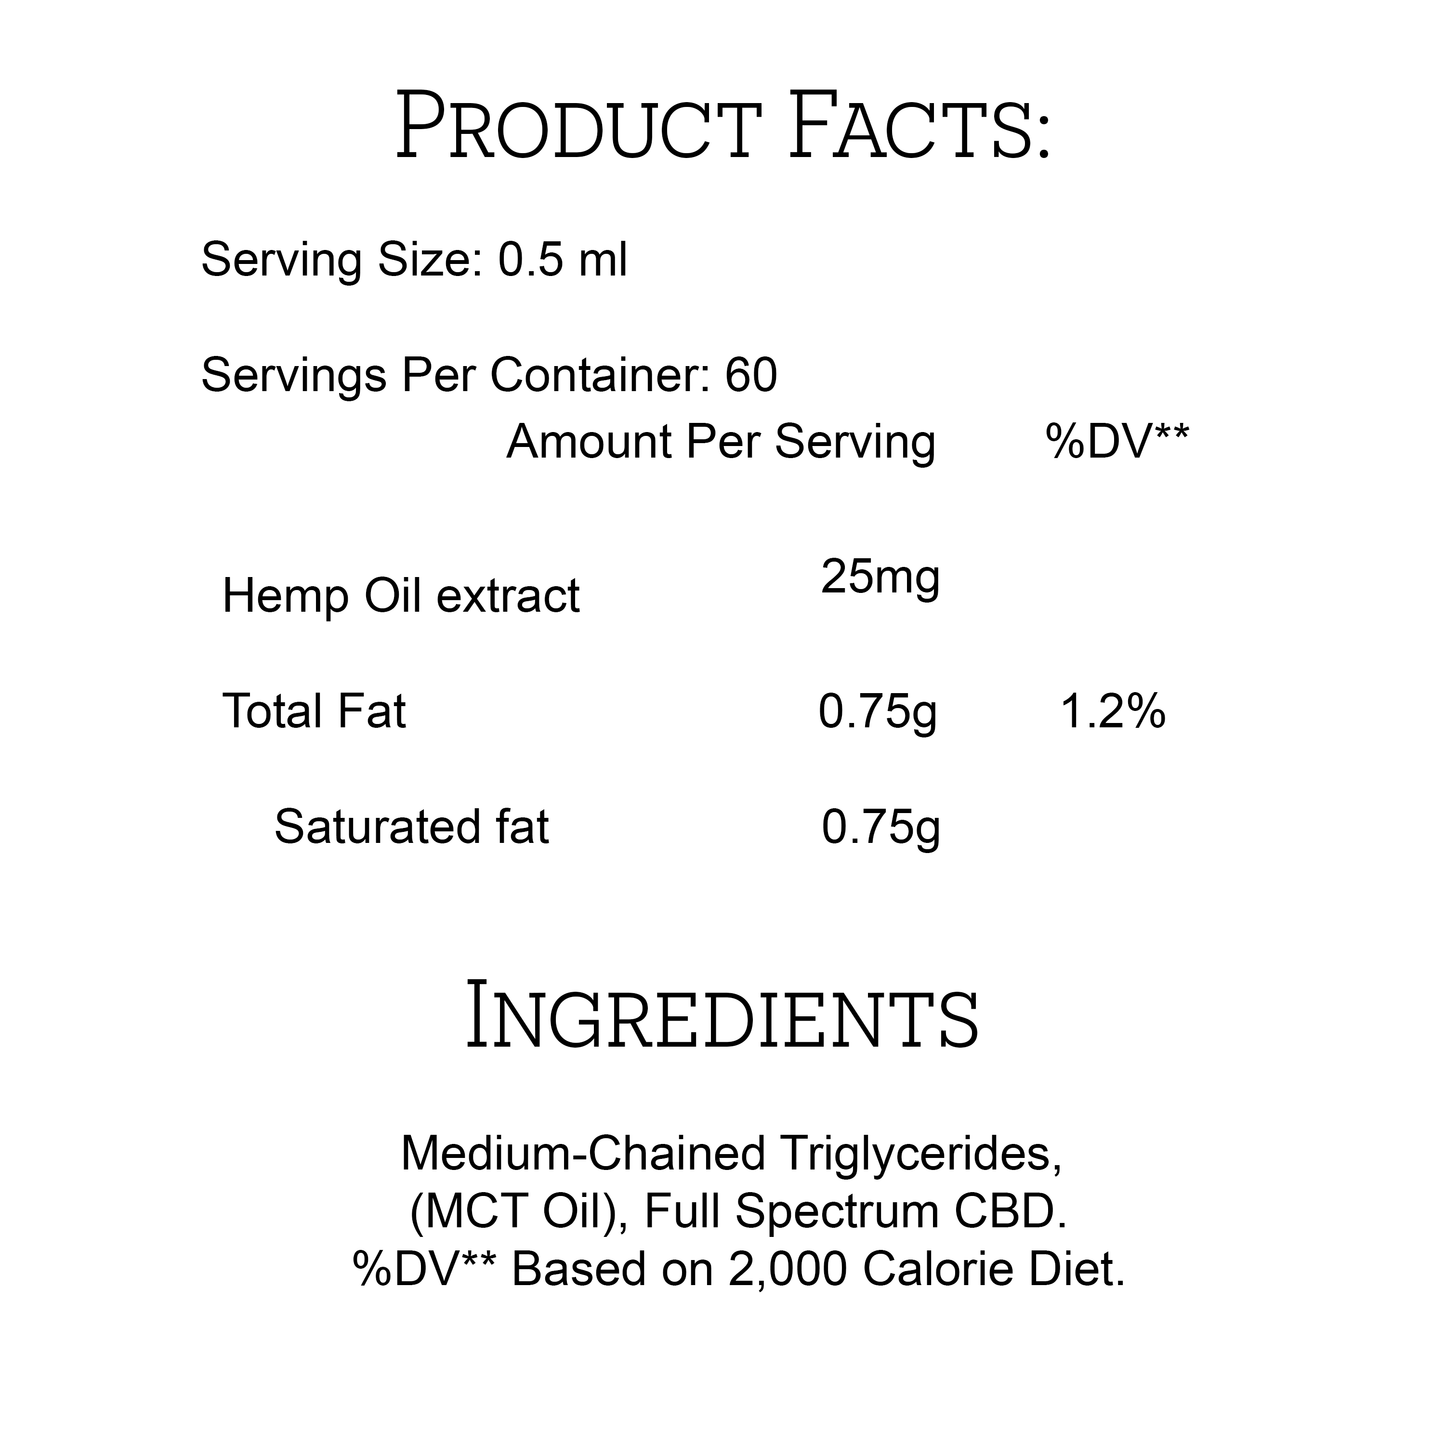 Product label of the Product Facts and Ingredients.